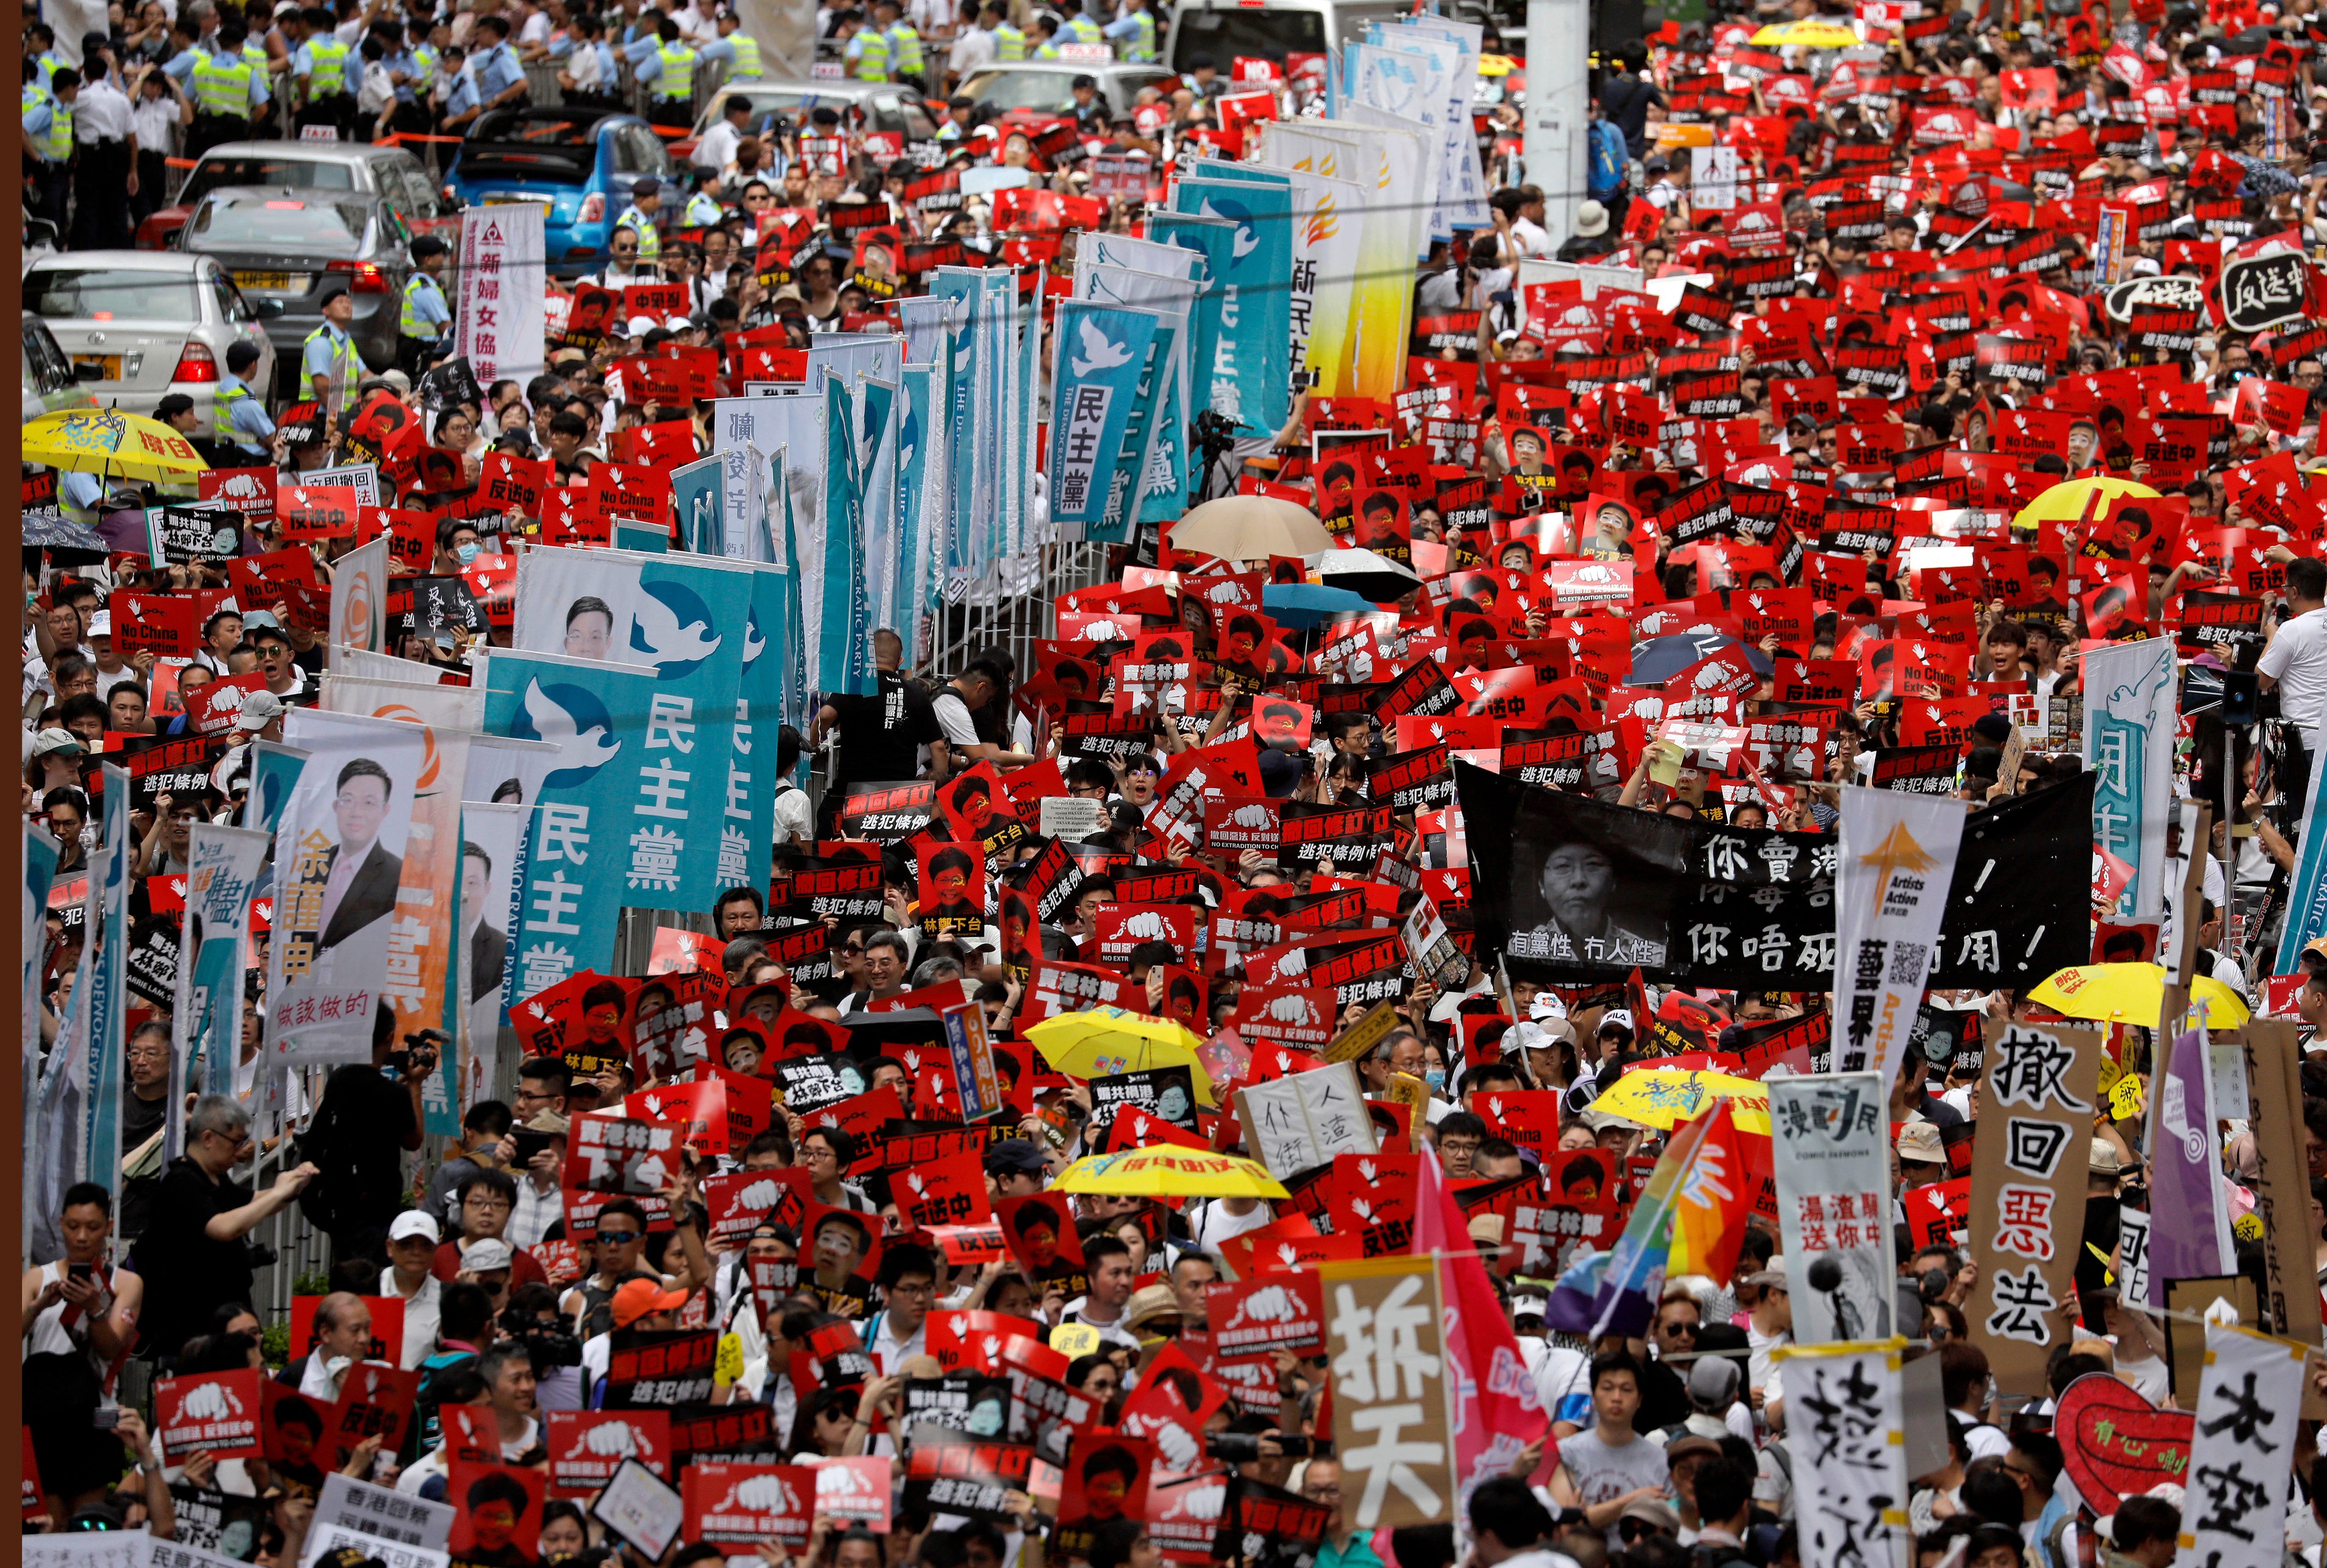 A sea of protesters is marching through central Hong Kong in a major demonstration against government-sponsored legislation that would allow people to be extradited to mainland China to face charges.